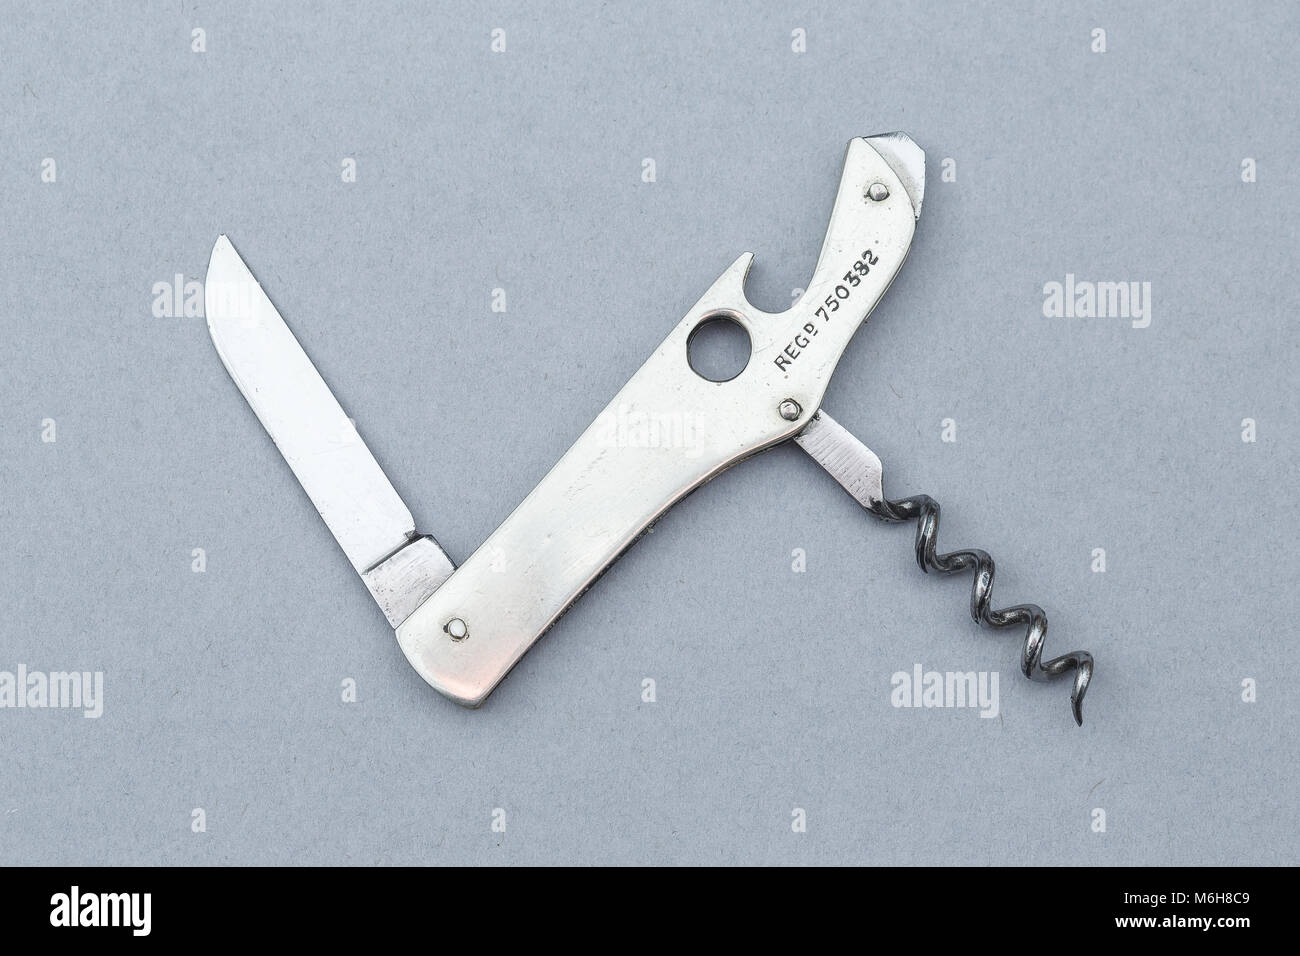 Barman's tool, including a folding knife, corkscrew, cigar cutter, bottle opener, etc.  Made by Willam Rodgers, Sheffield, with a registered design Stock Photo